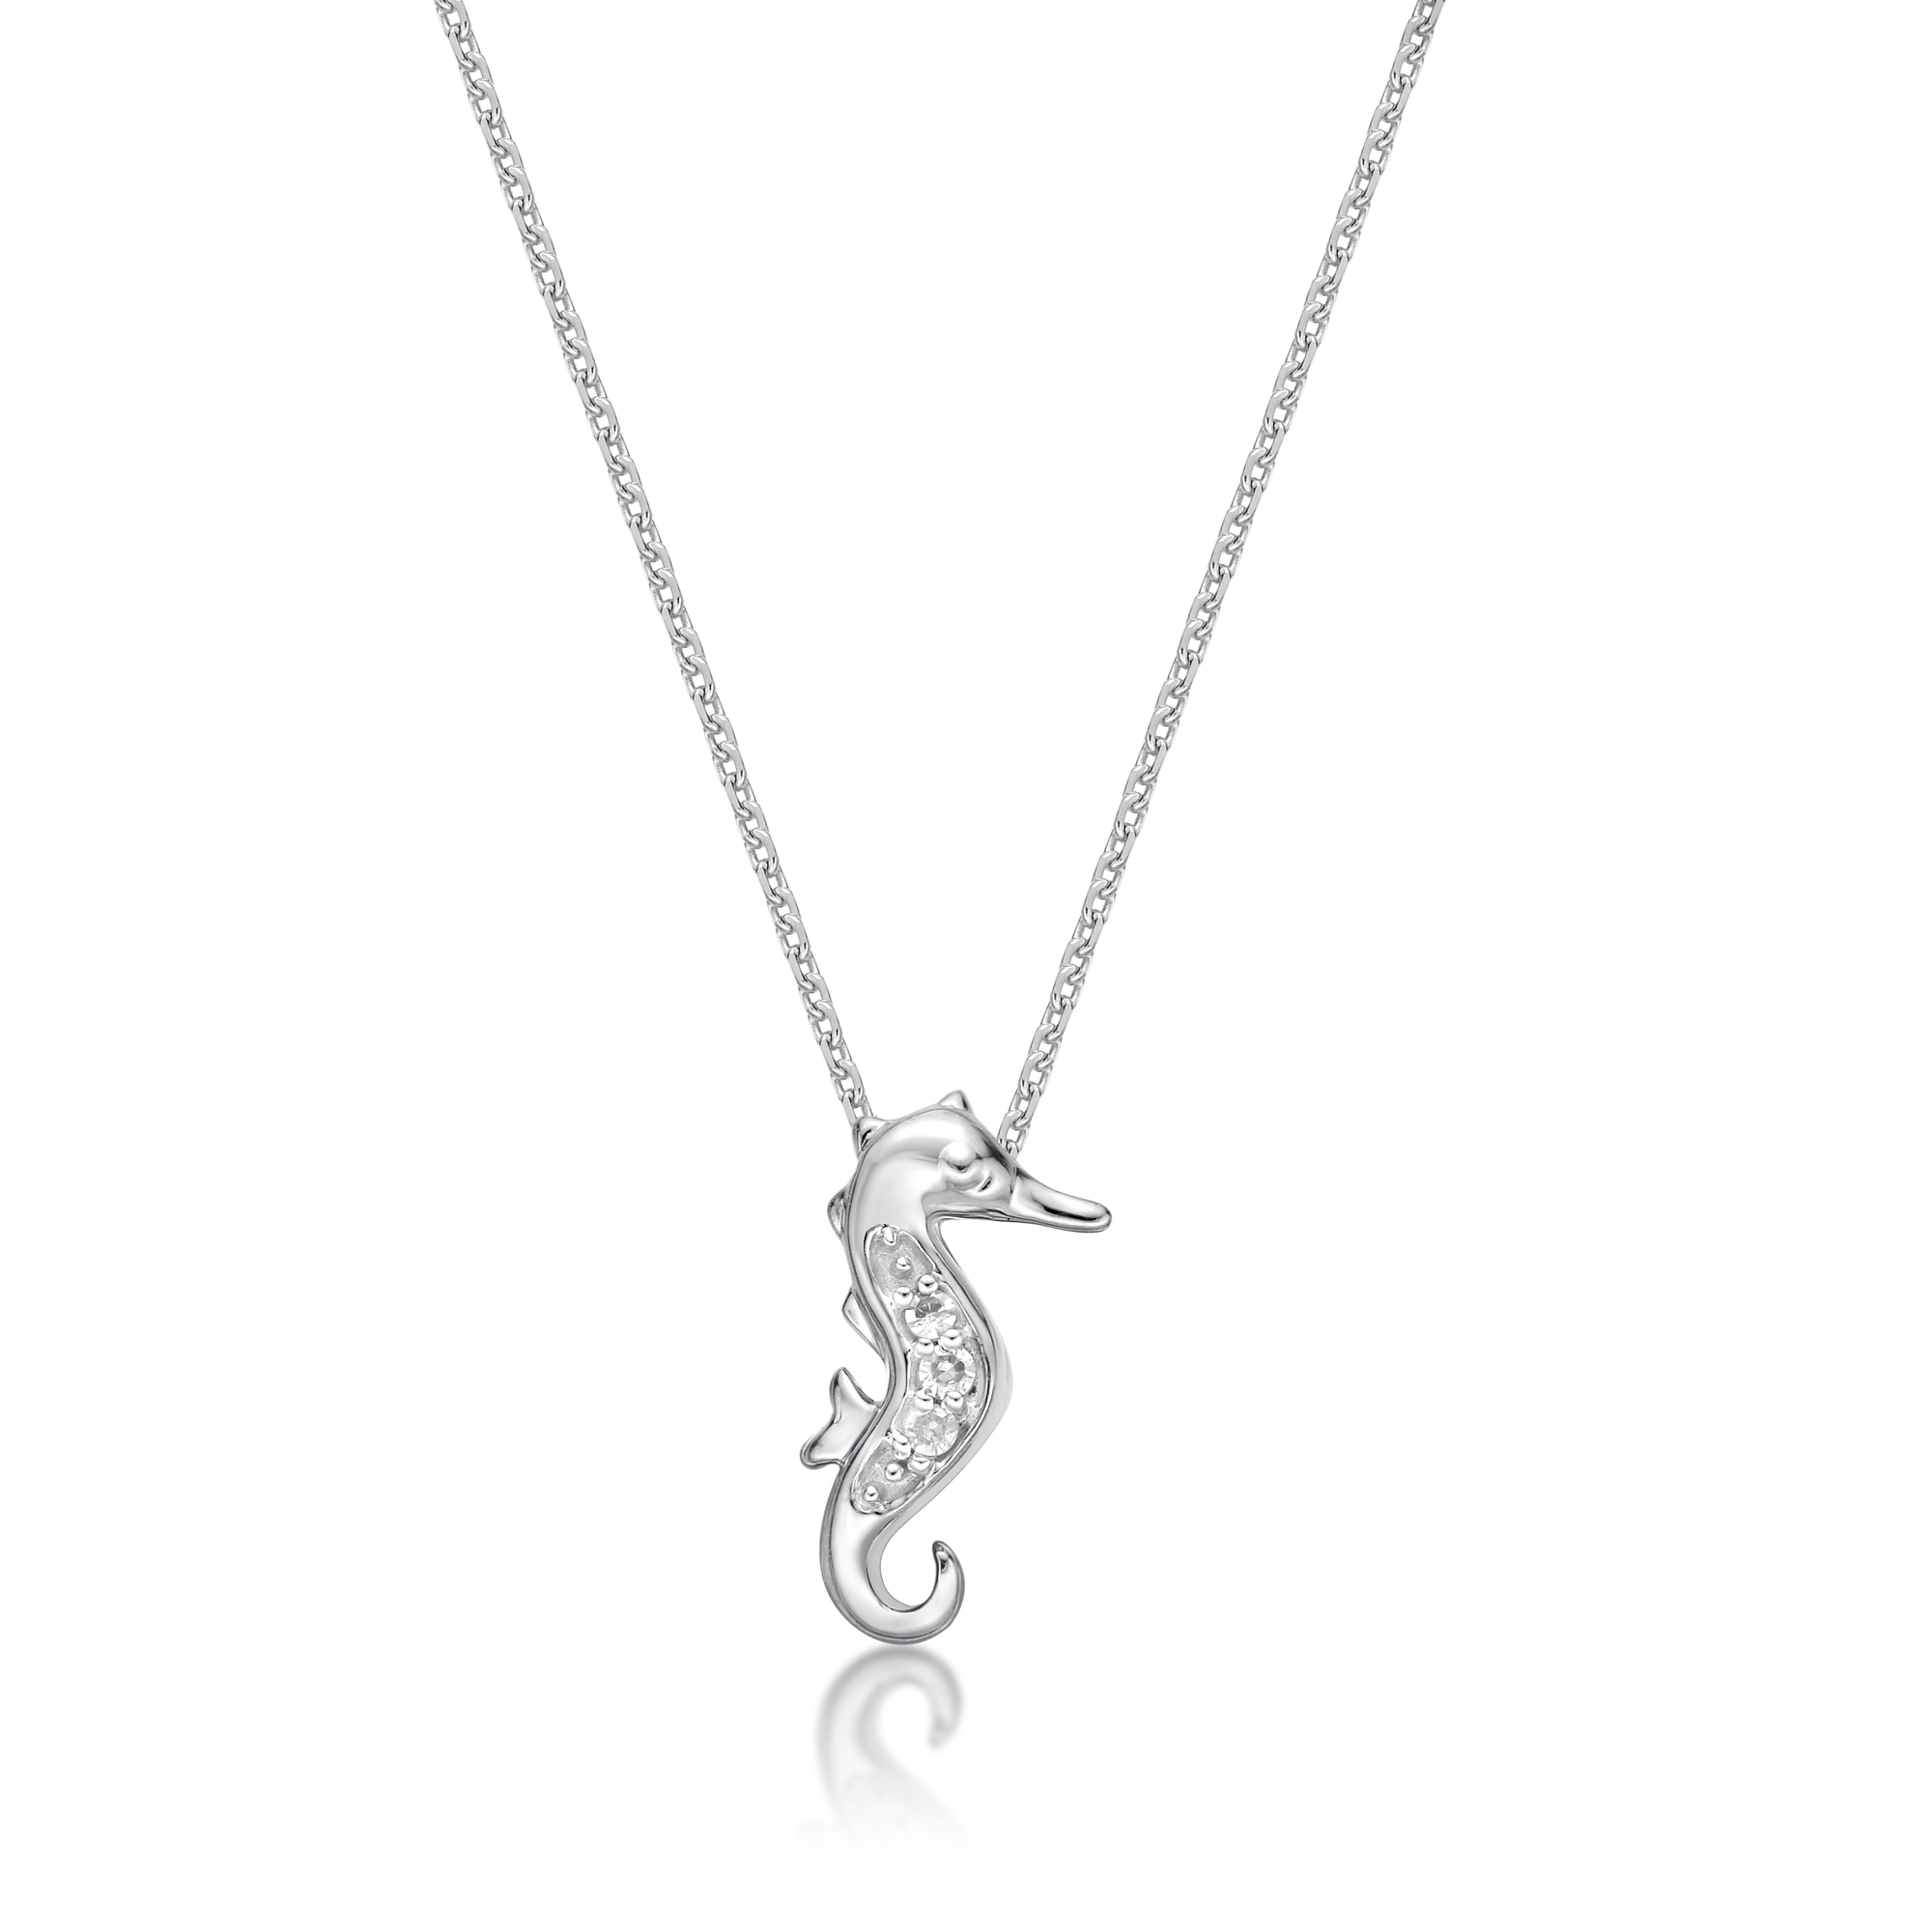 Lavari Jewelers Women's Mini Seahorse Diamond Pendant with Lobster Clasp, 10K White Gold, .01 Cttw, 18 Inch Cable Chain